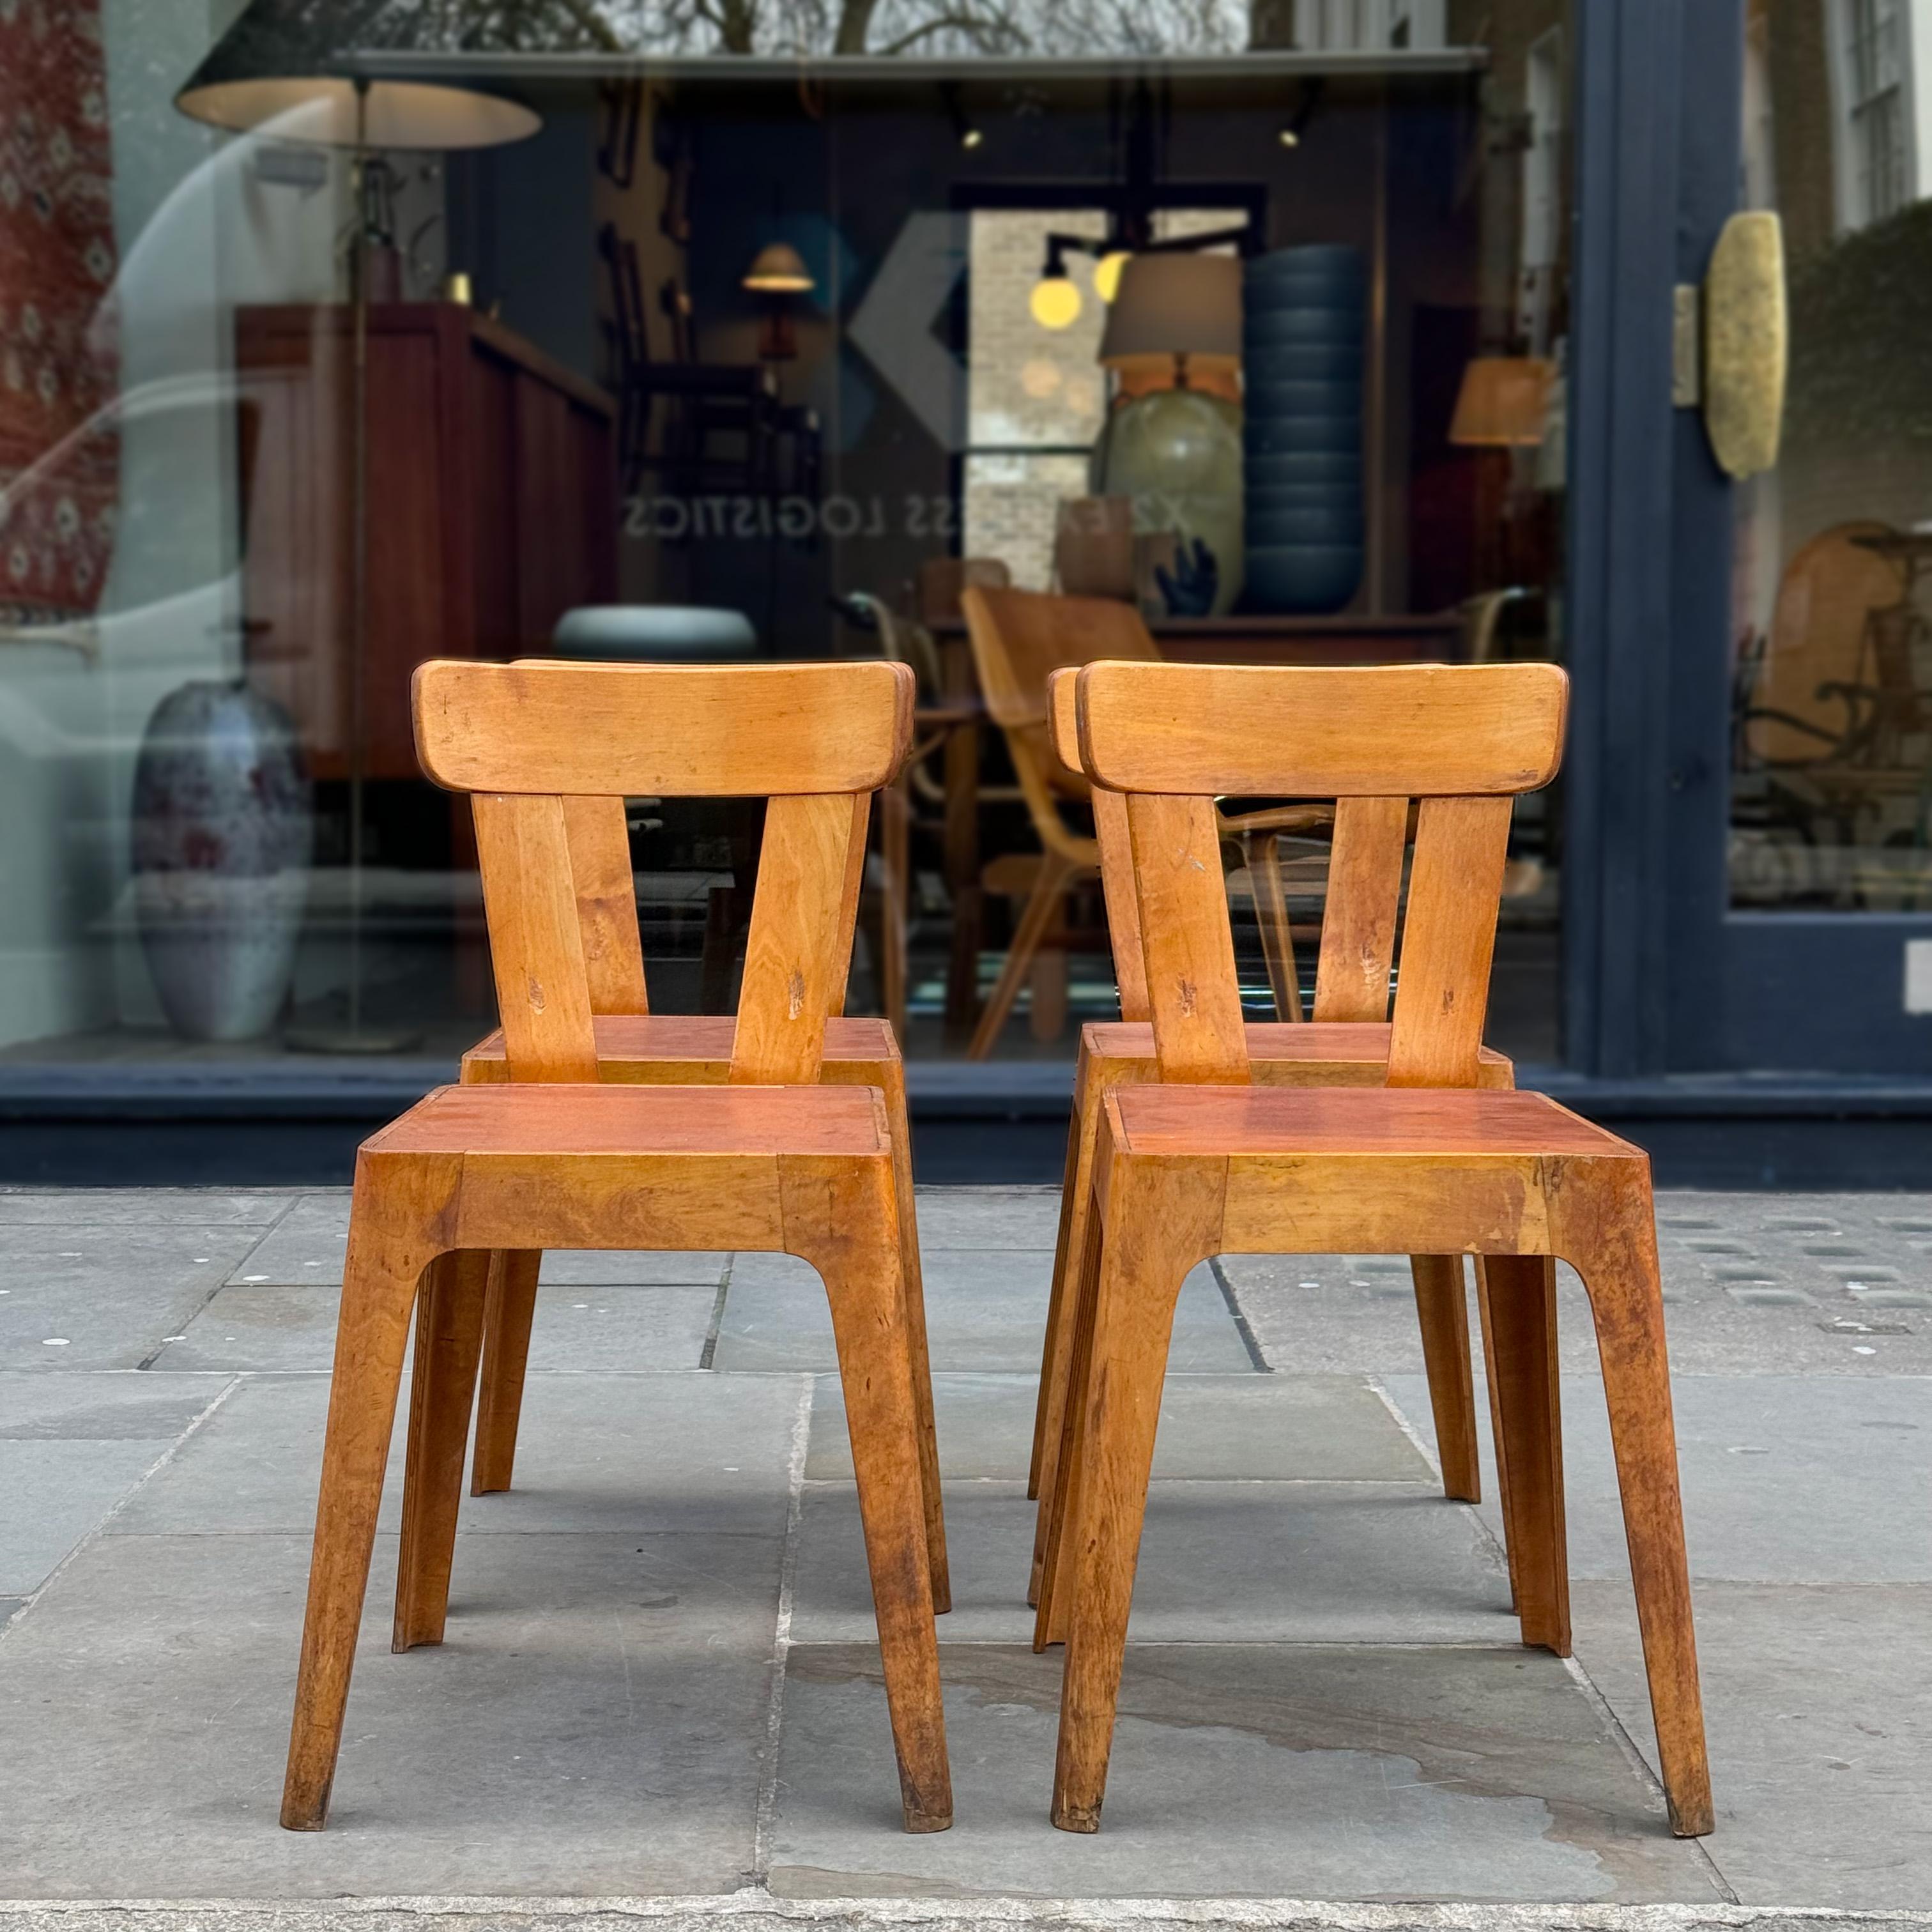 A set of 4 laminated birch plywood chairs, made in Sweden during the early-1950s. 

Similar in form, although larger in dimension, this set of 4 birch plywood chairs resemble the form of midcentury plywood school chairs; light in weight and easily